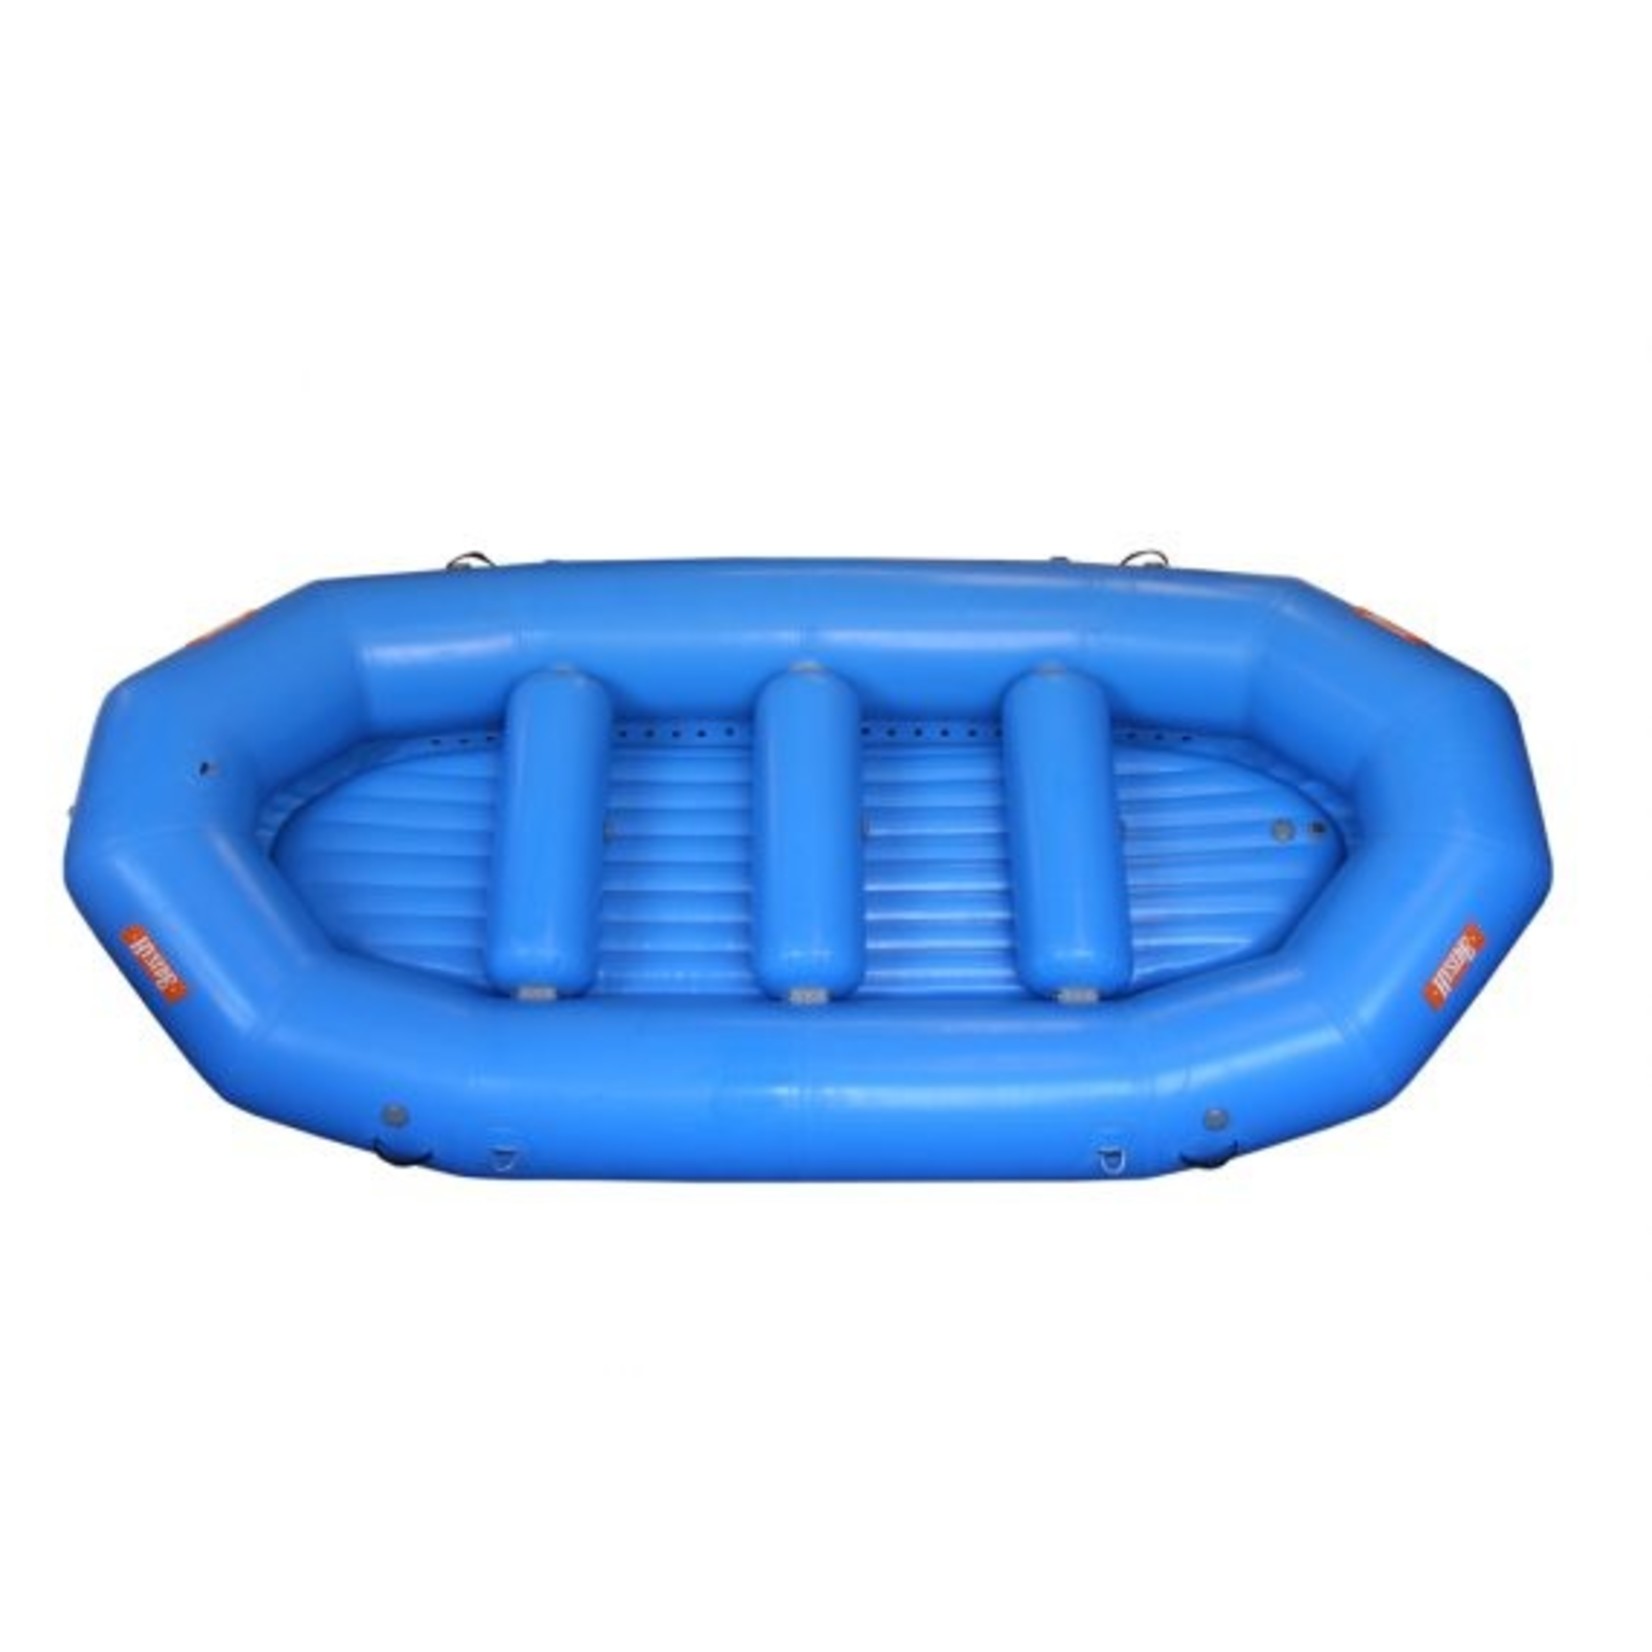 Hyside Inflatables Hyside Pro 14.0